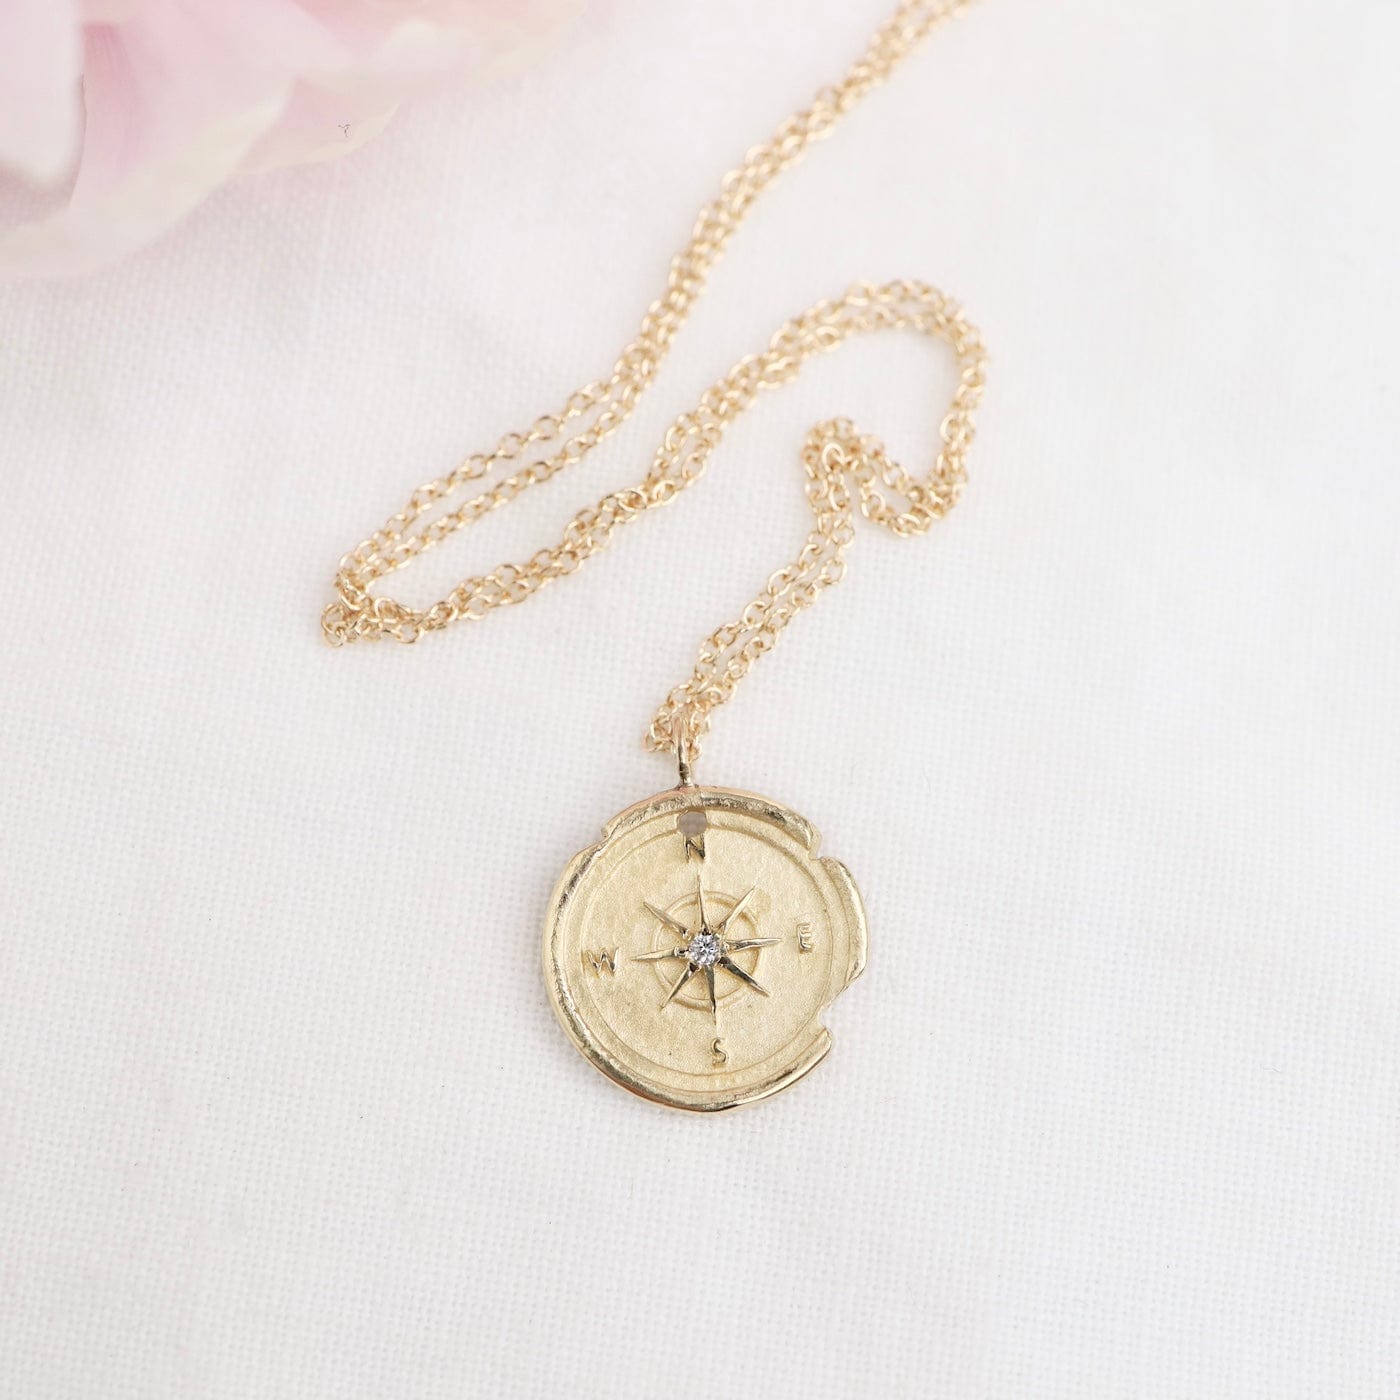 NKL-14K 14k Gold Small Compass Artifact Necklace